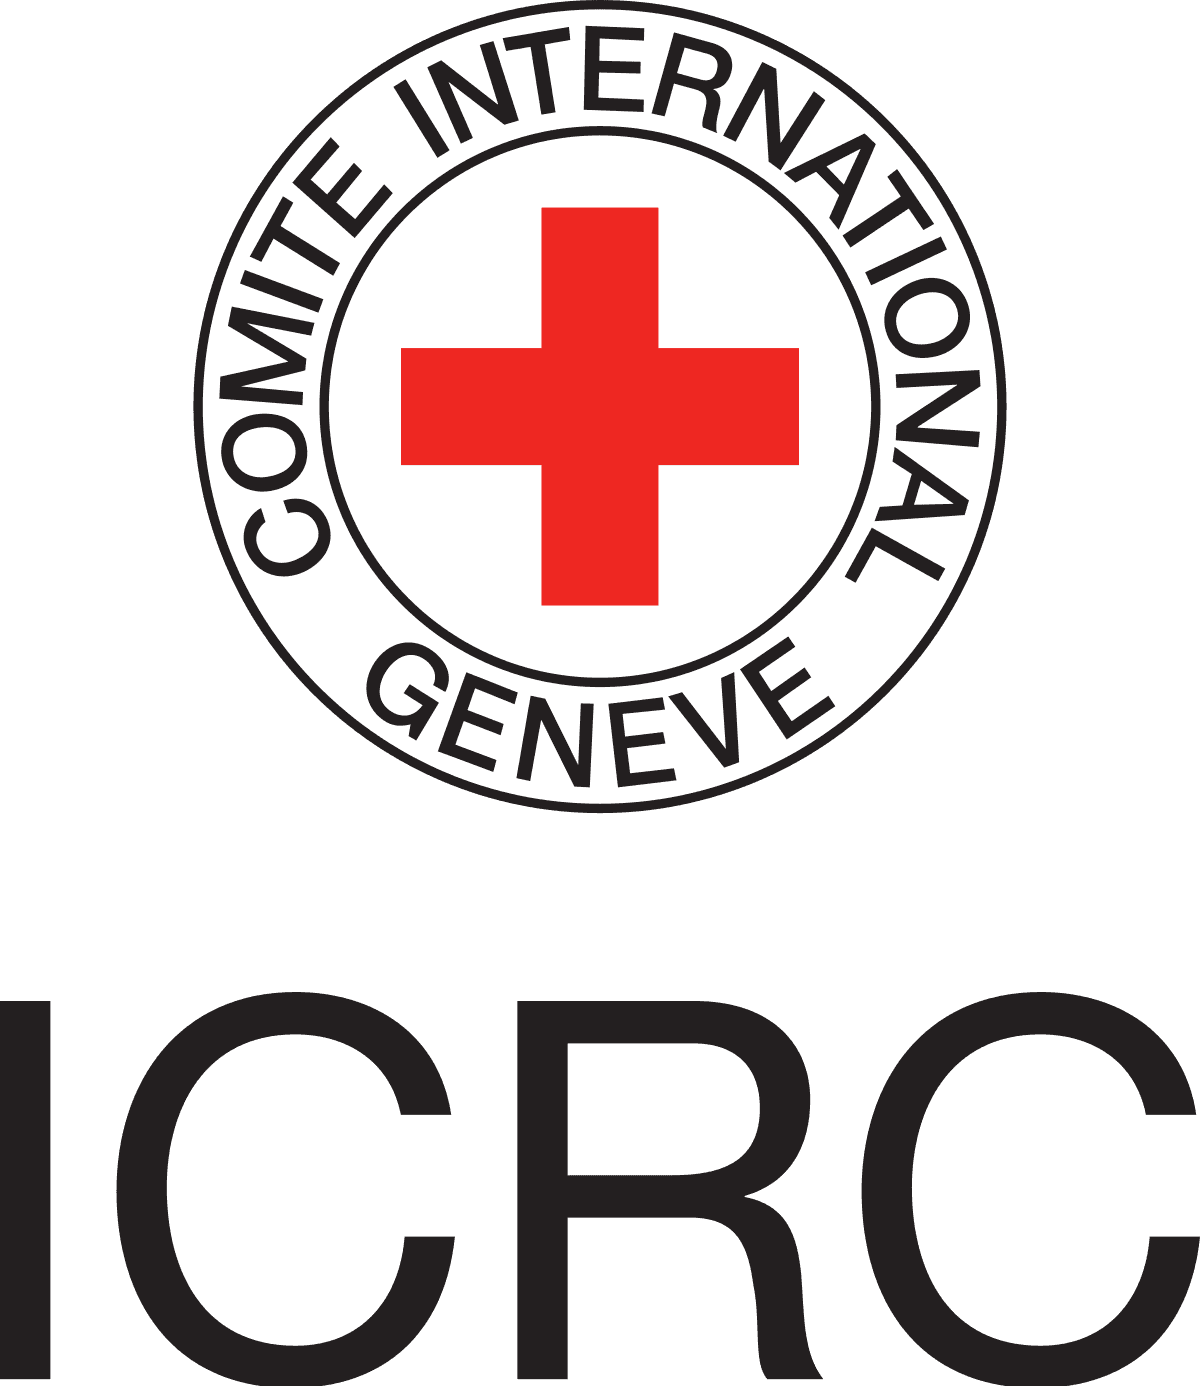 ICRC - International Committee of the Red Cross